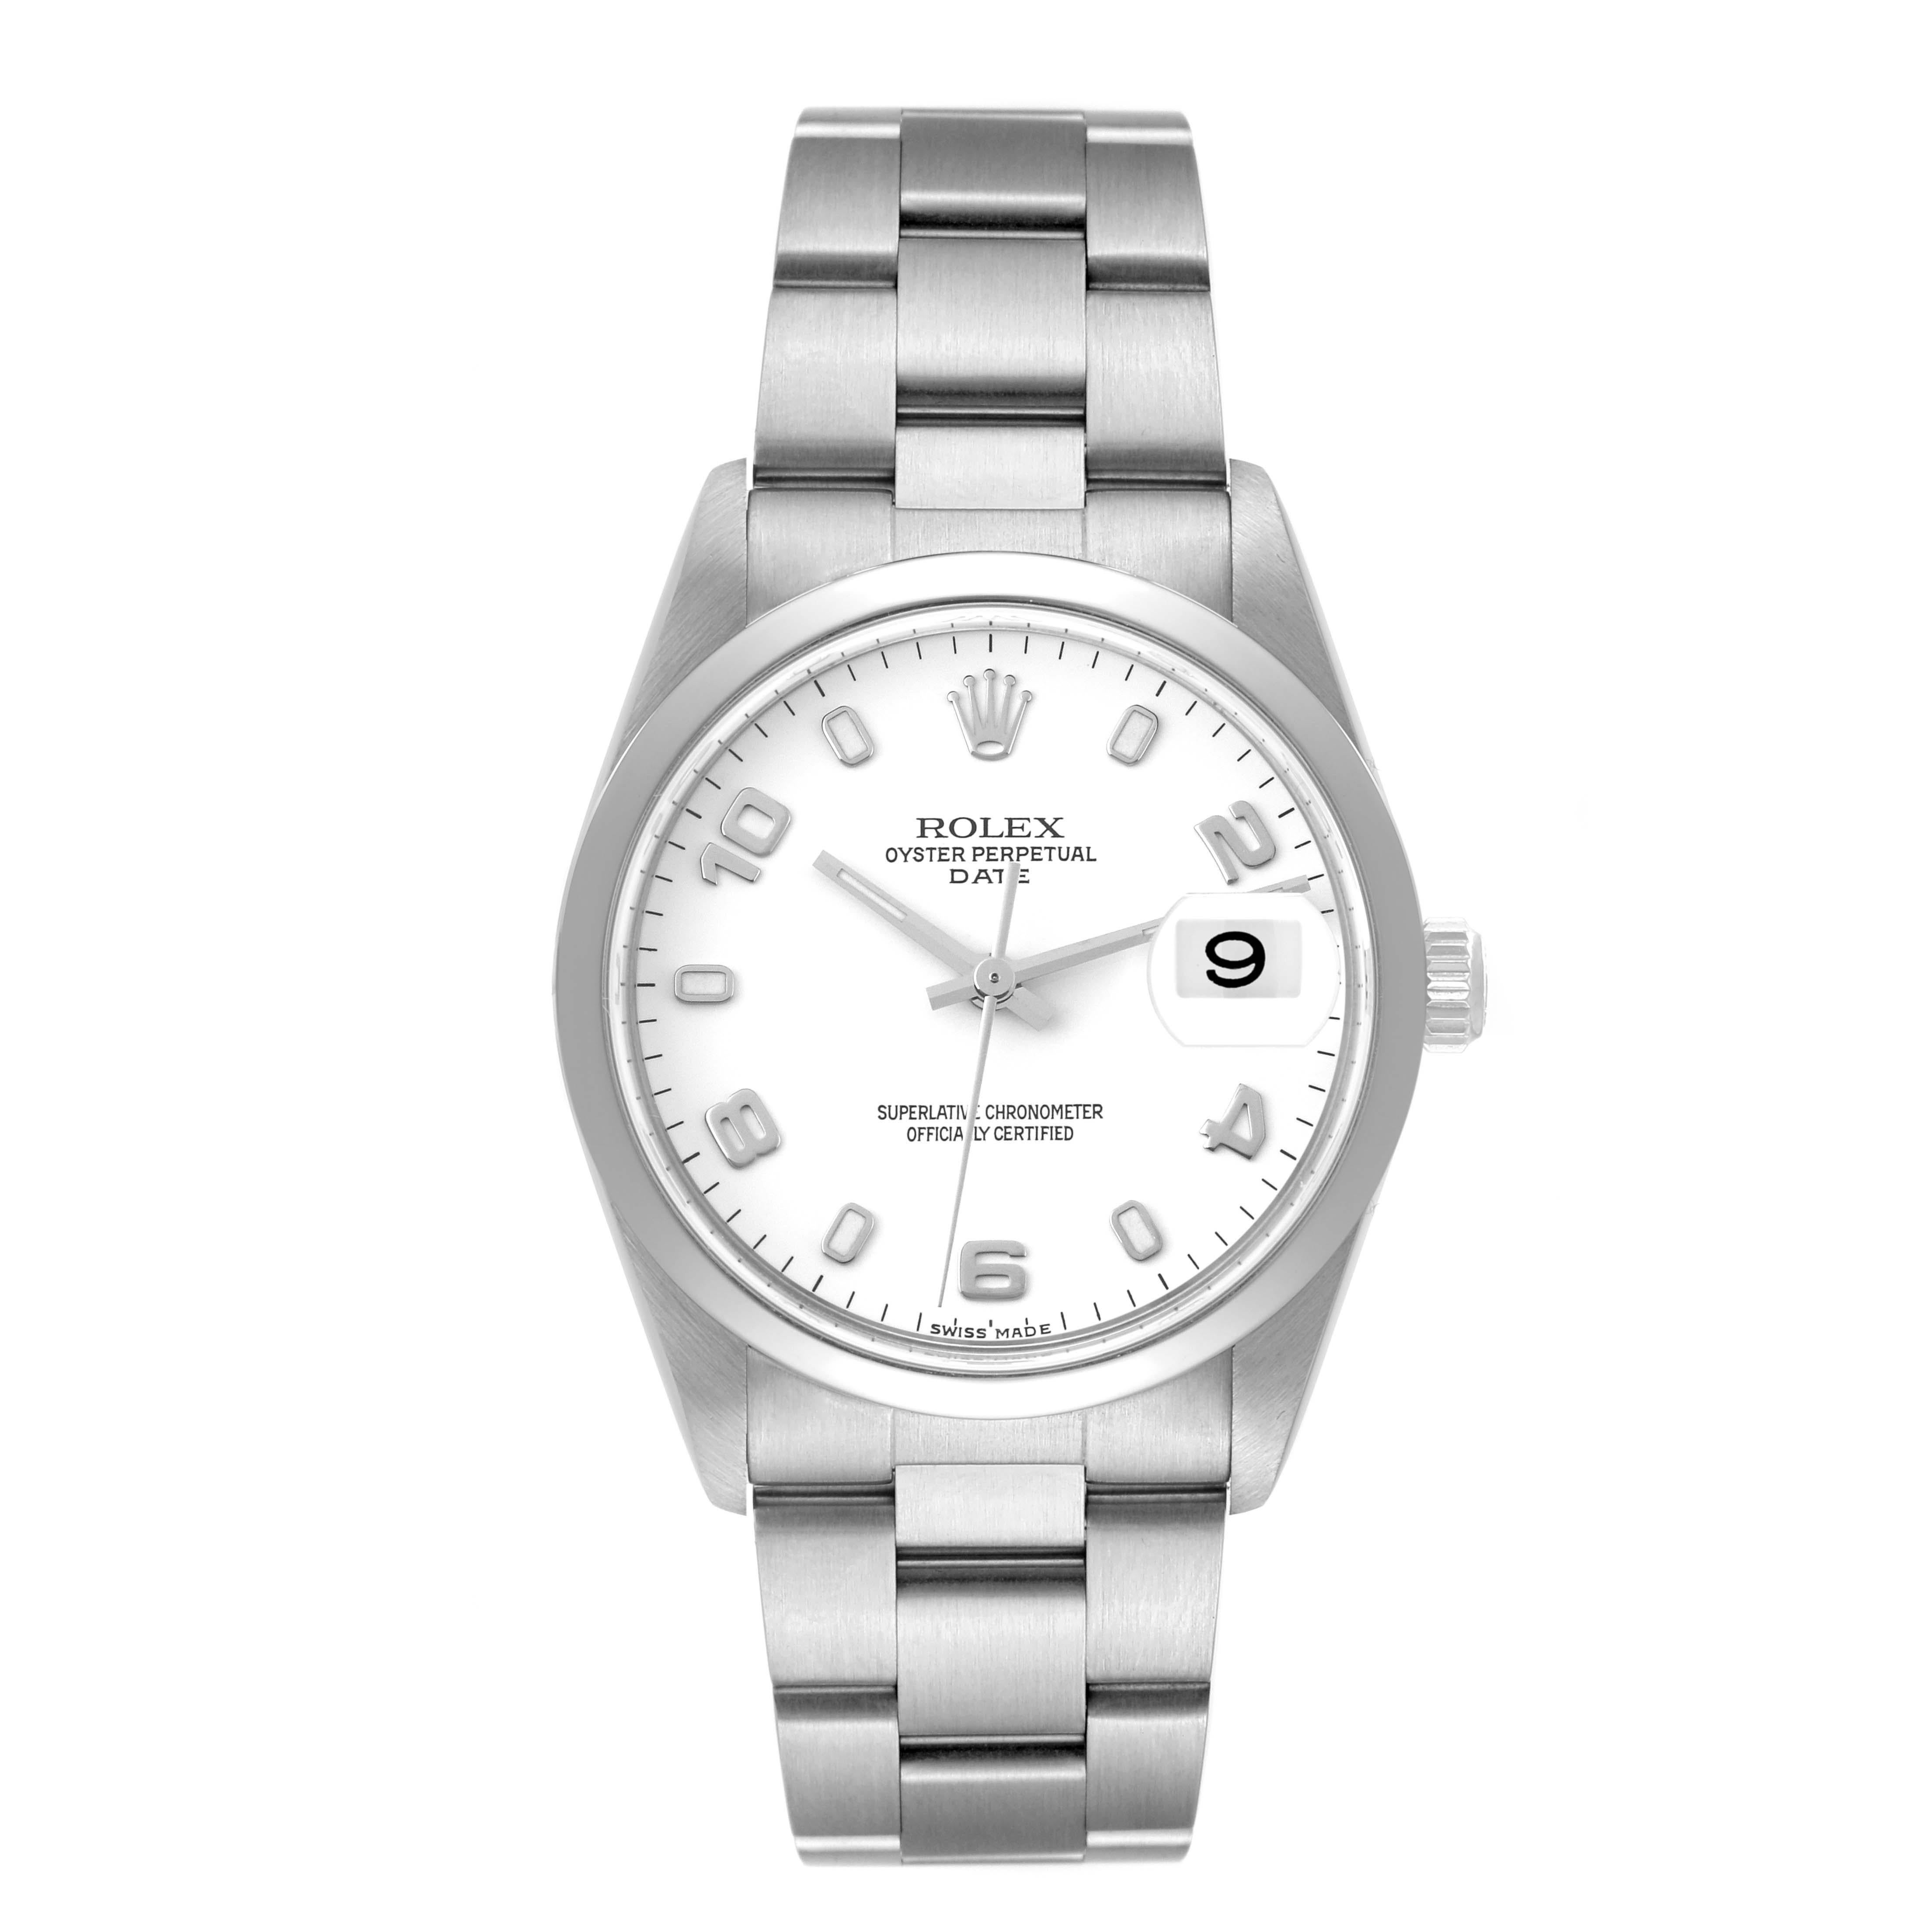 Rolex Date White Dial Oyster Bracelet Steel Mens Watch 15200. Officially certified chronometer self-winding movement. Stainless steel oyster case 34.0 mm in diameter. Rolex logo on the crown. Stainless steel smooth bezel. Scratch resistant sapphire